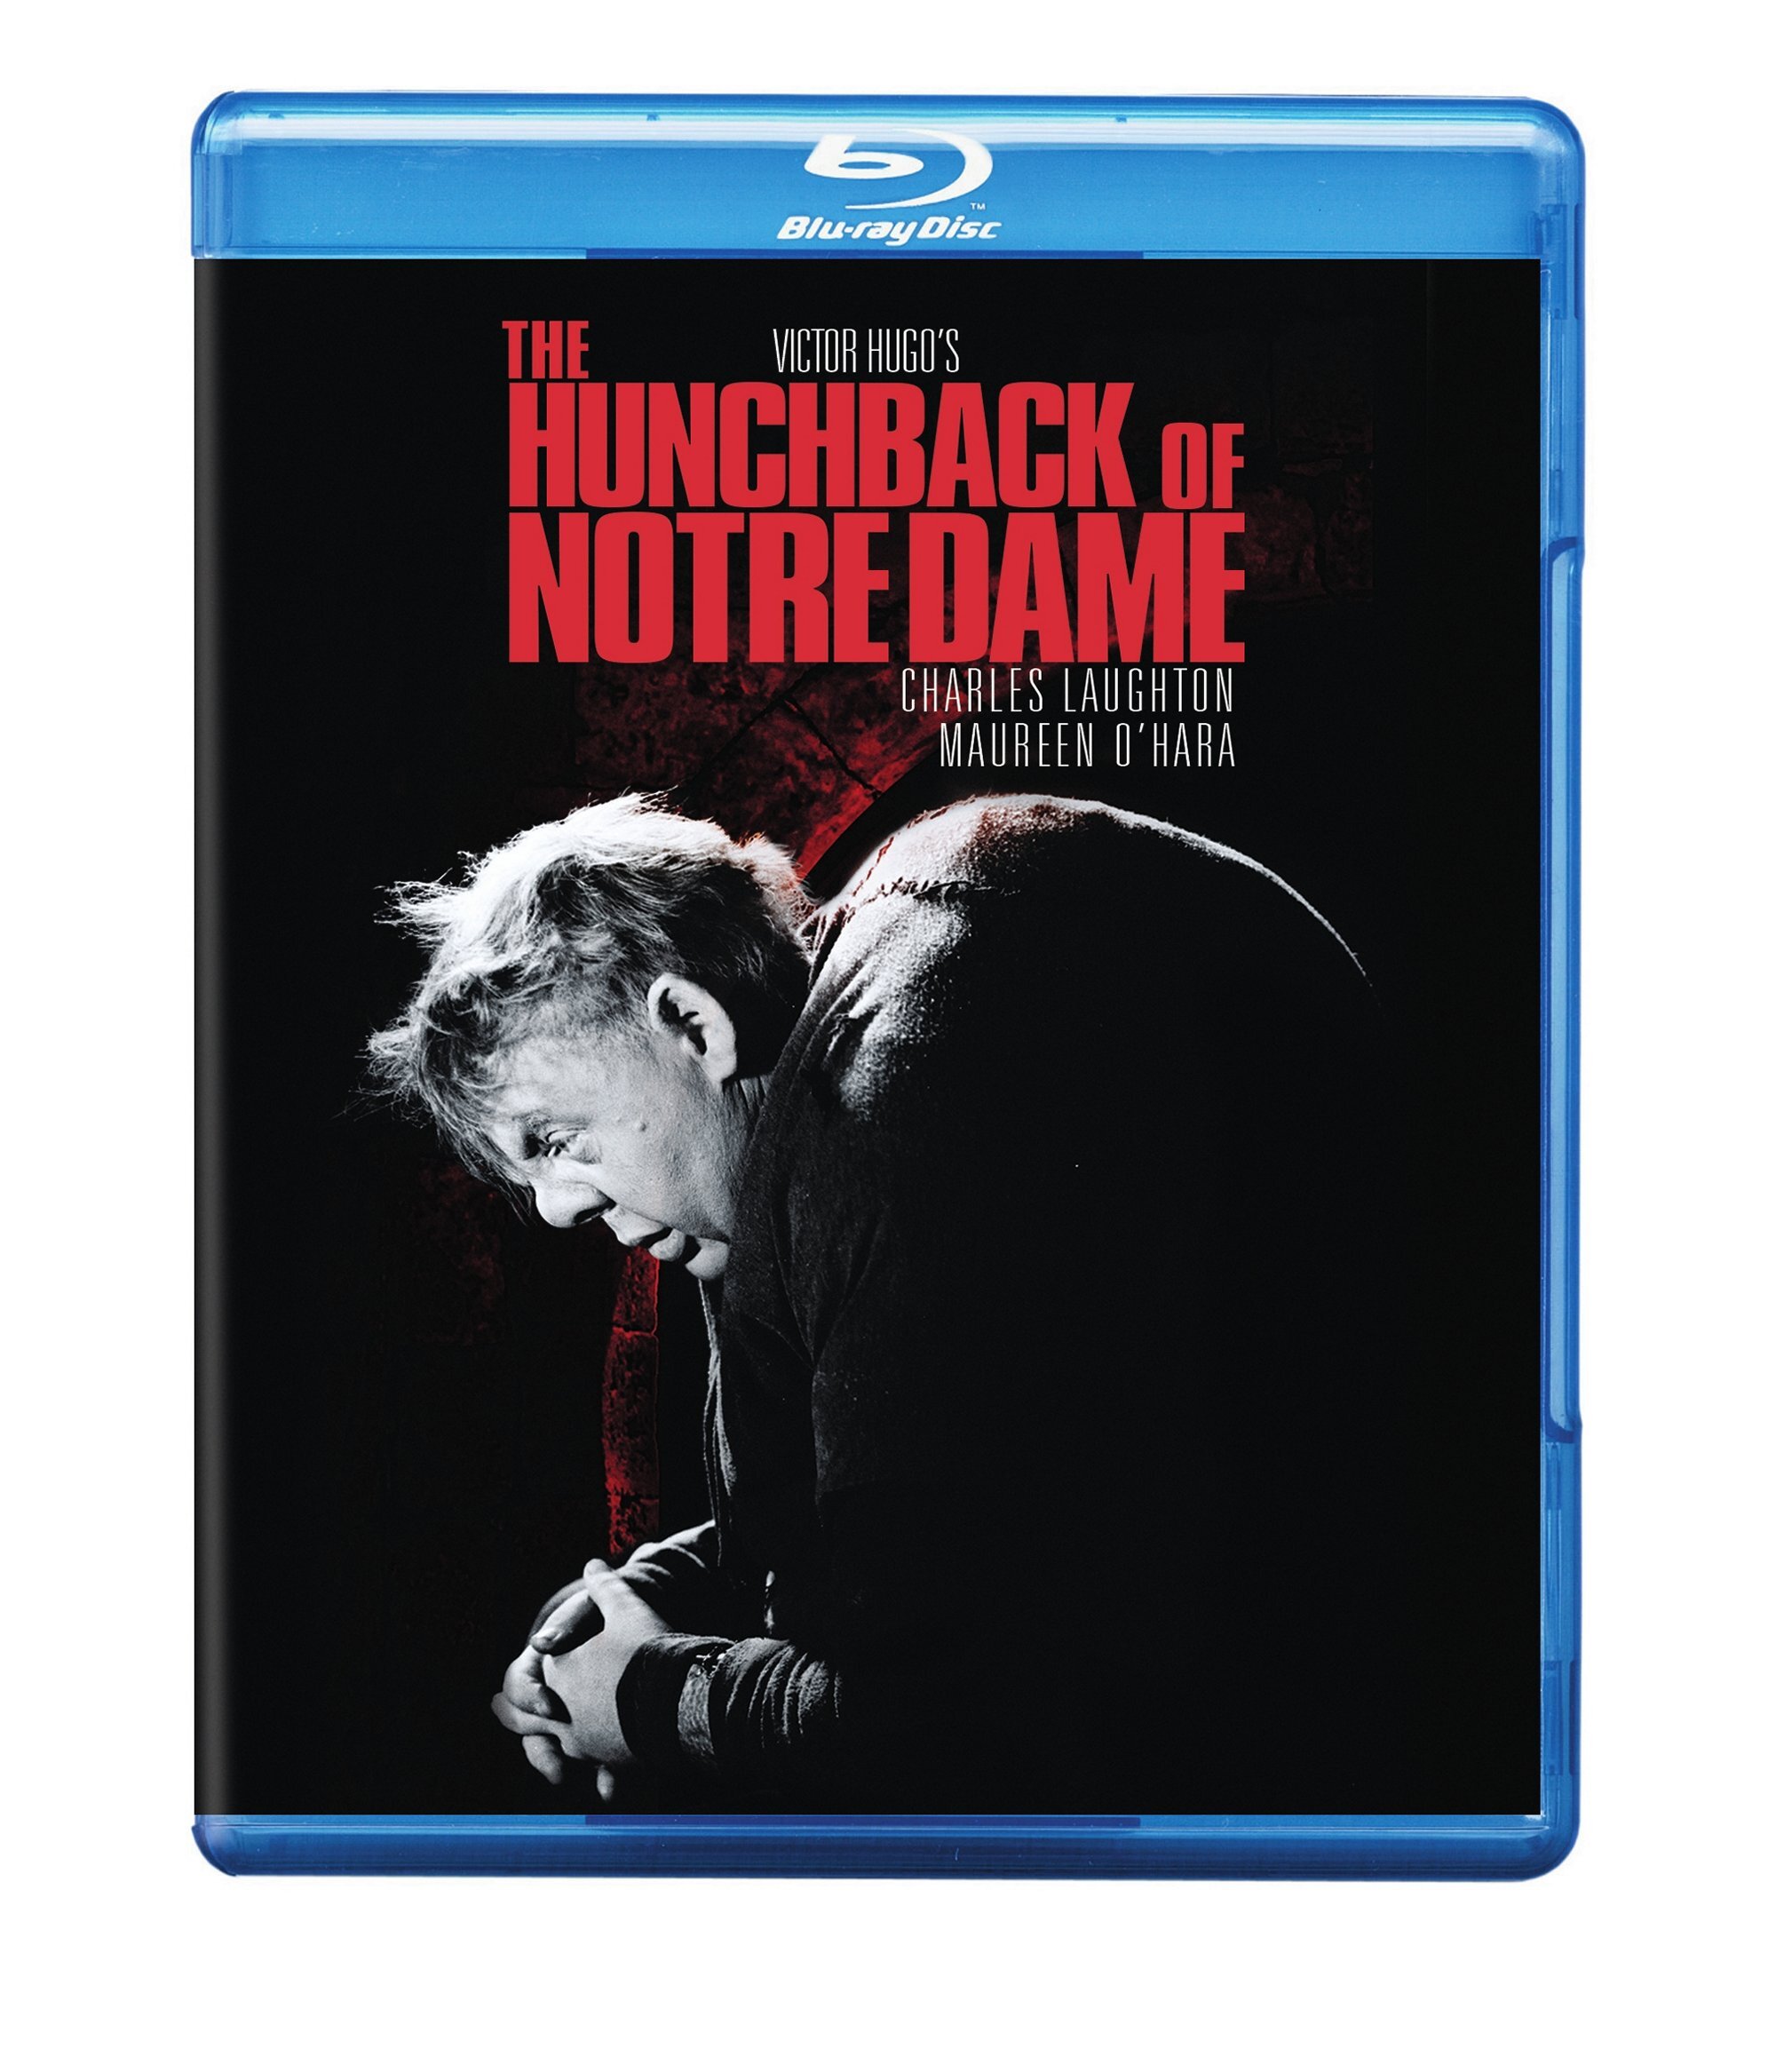 The Hunchback Of Notre Dame - Blu-ray [ 1939 ]  - Classic Movies On Blu-ray - Movies On GRUV